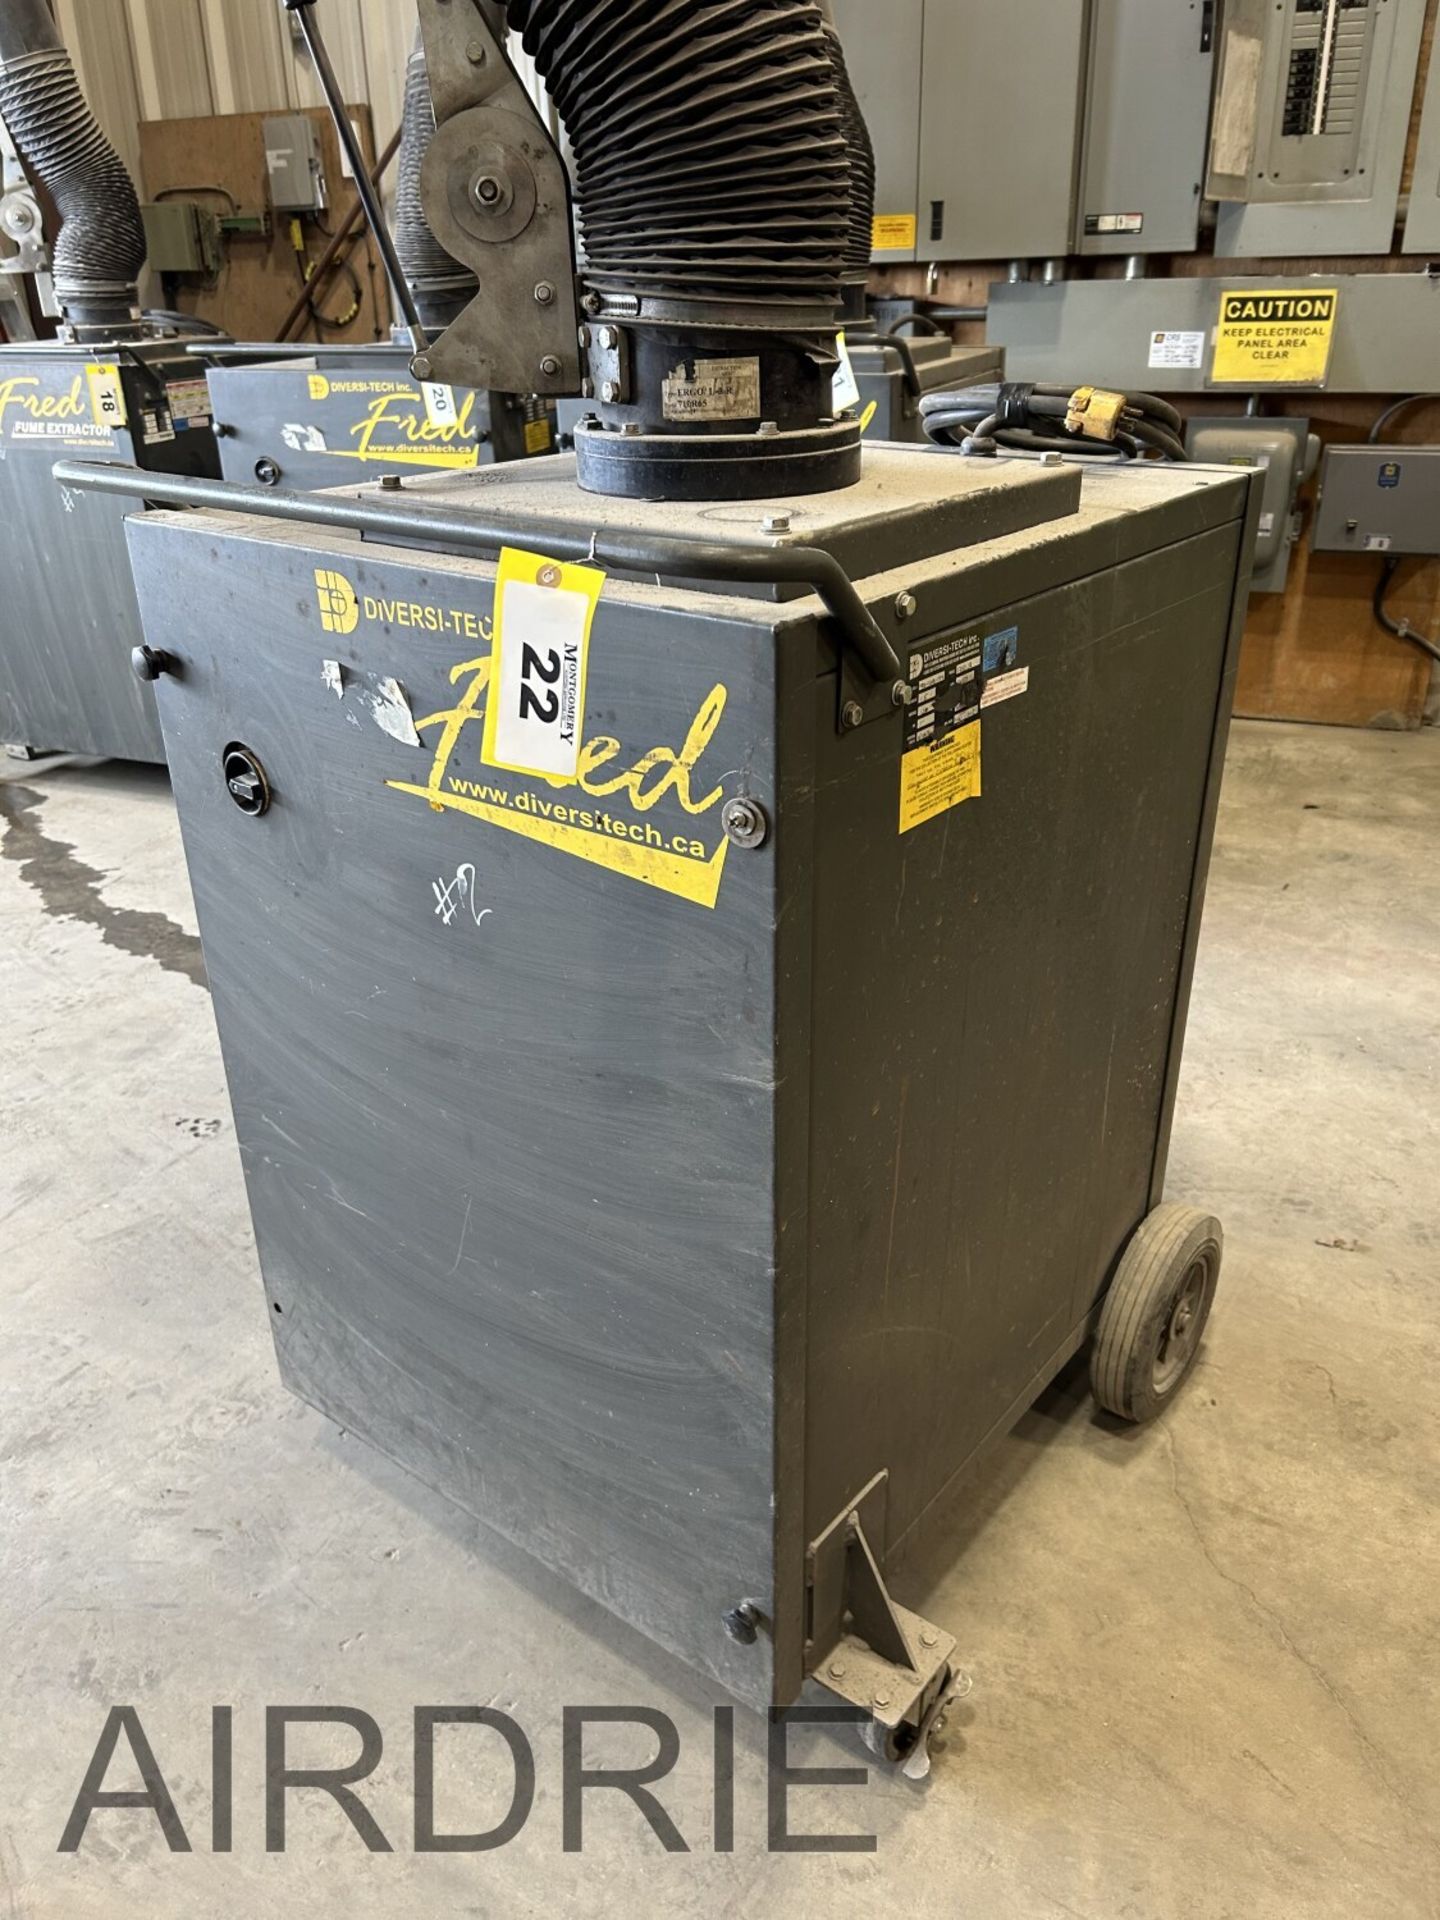 *OFFSITE* DIVERSI-TECH FRED SMOKE AND FUME EXTRACTOR , MOD. FREDJR, S/N FRJ-1203-1154 - Image 4 of 10